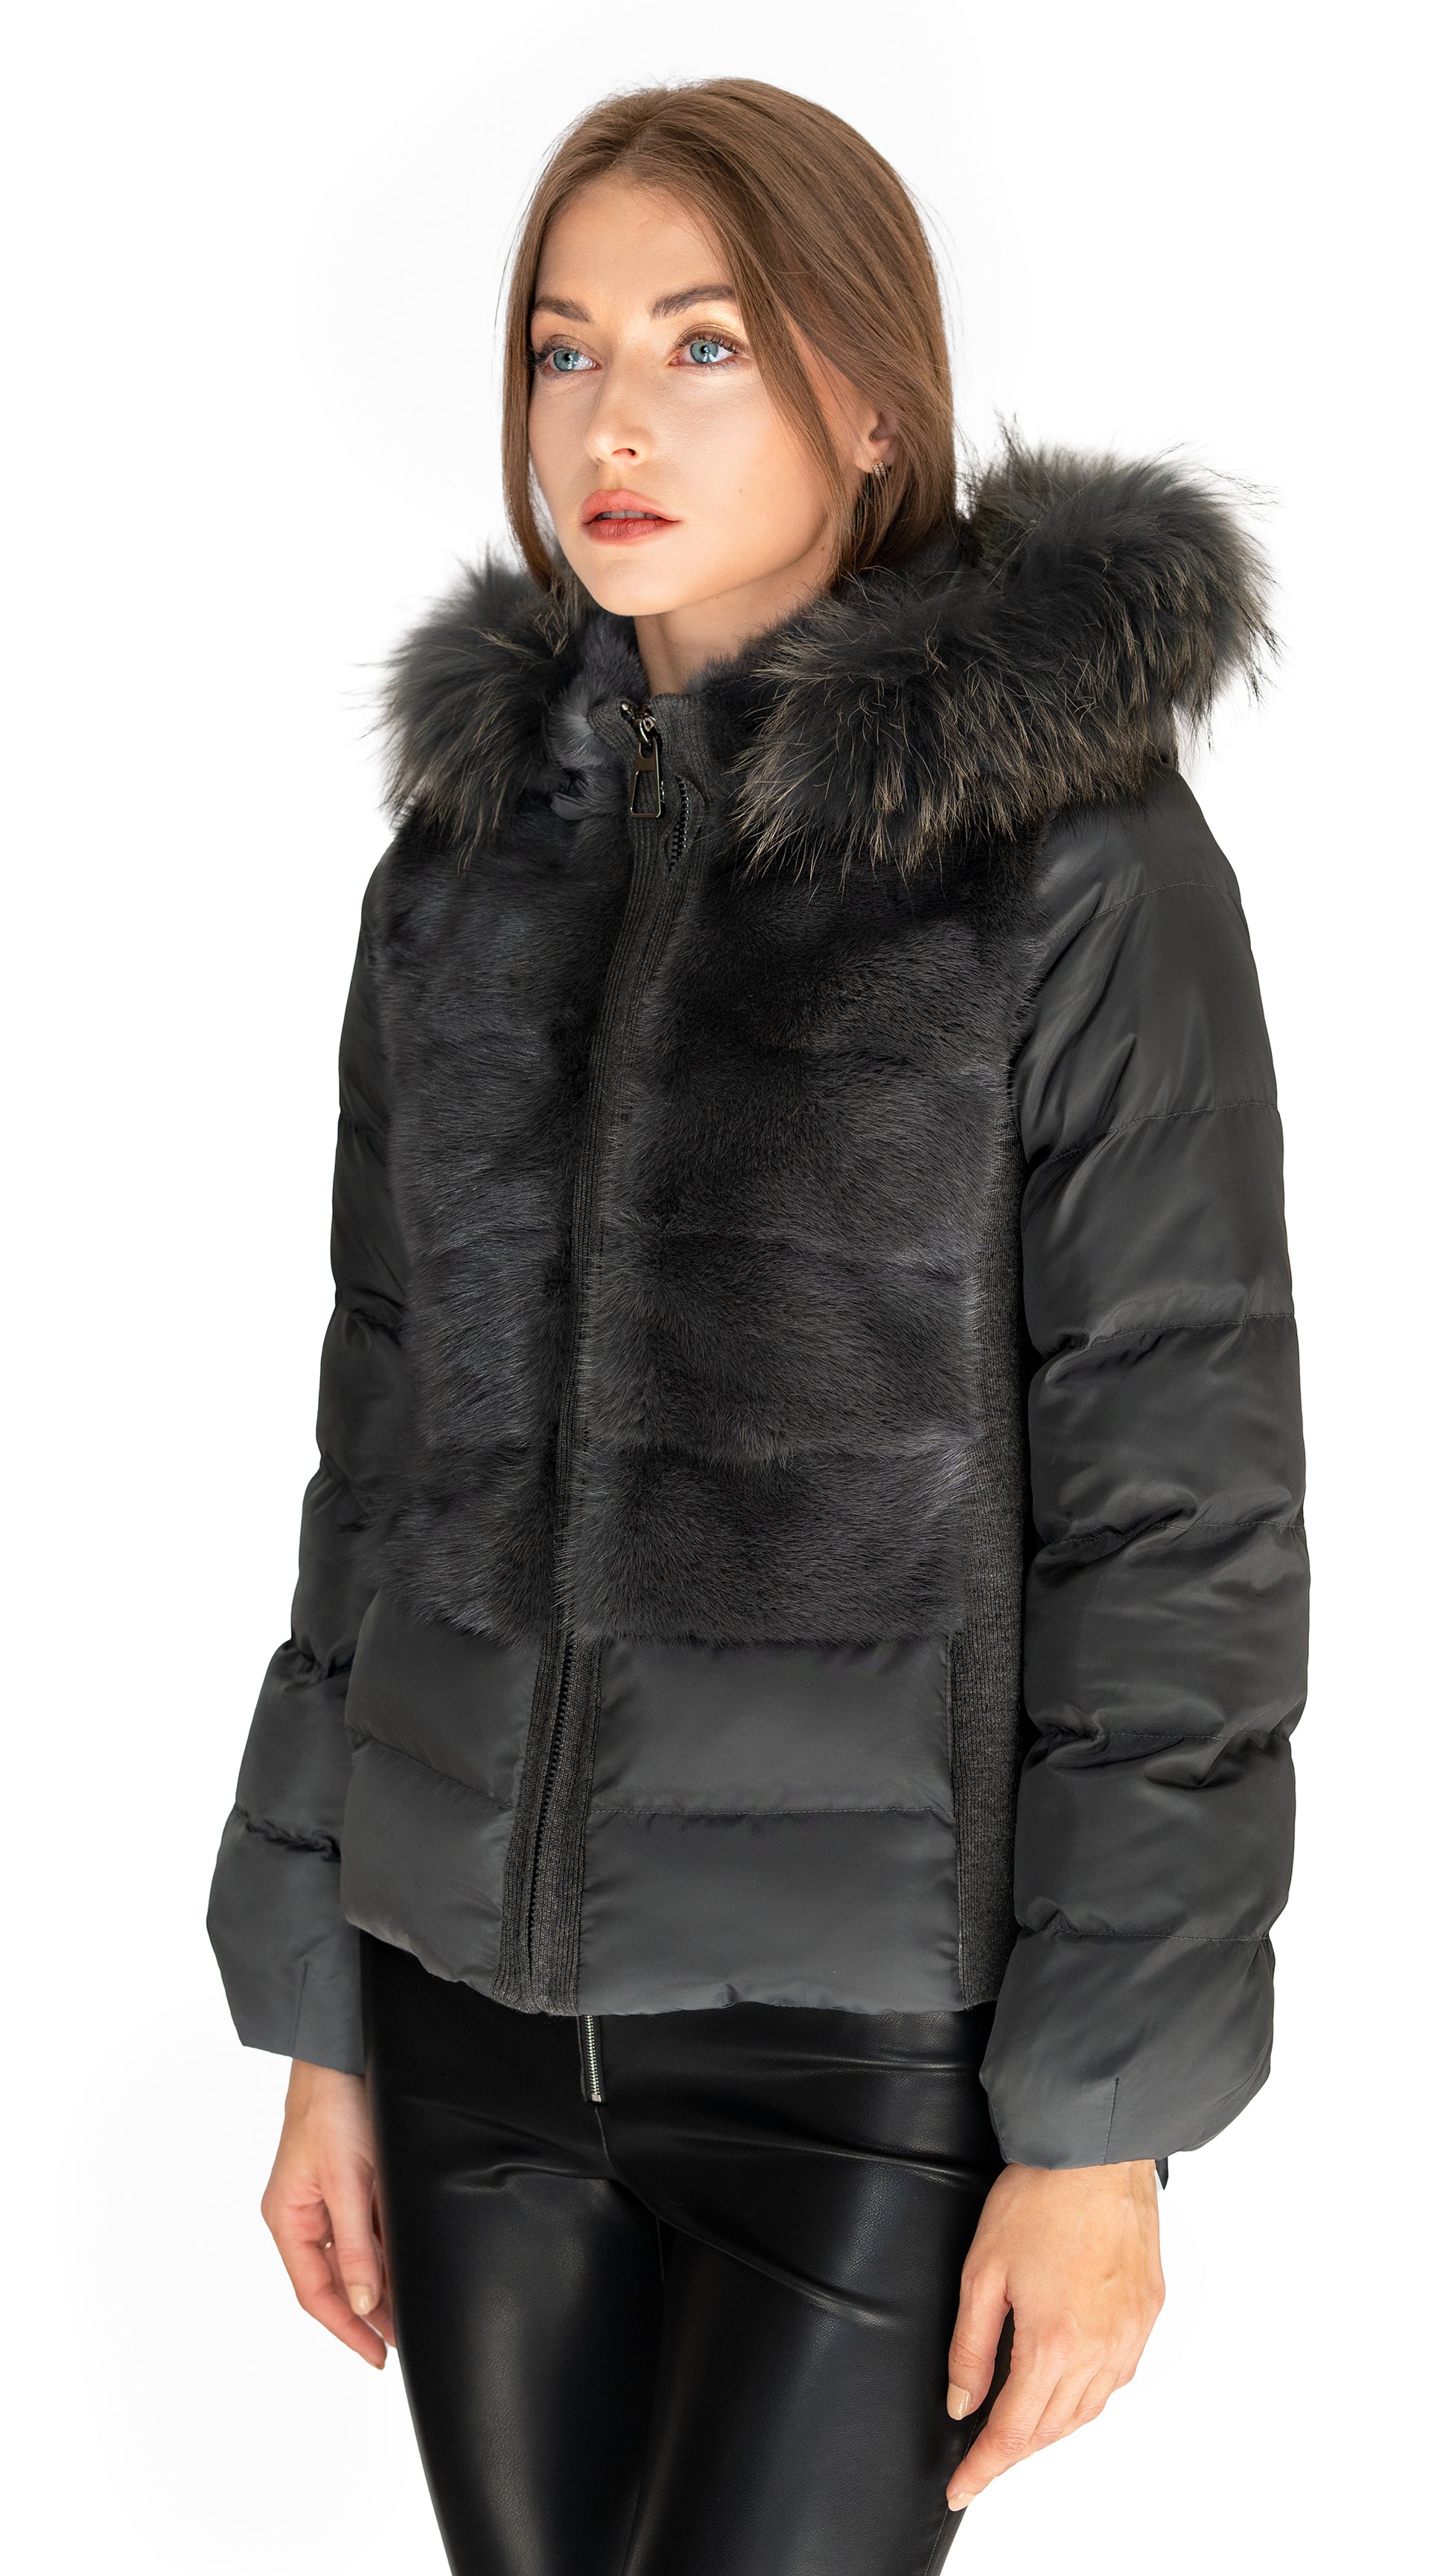 Rizal puffer jacket with fox collar and mink front in grey color